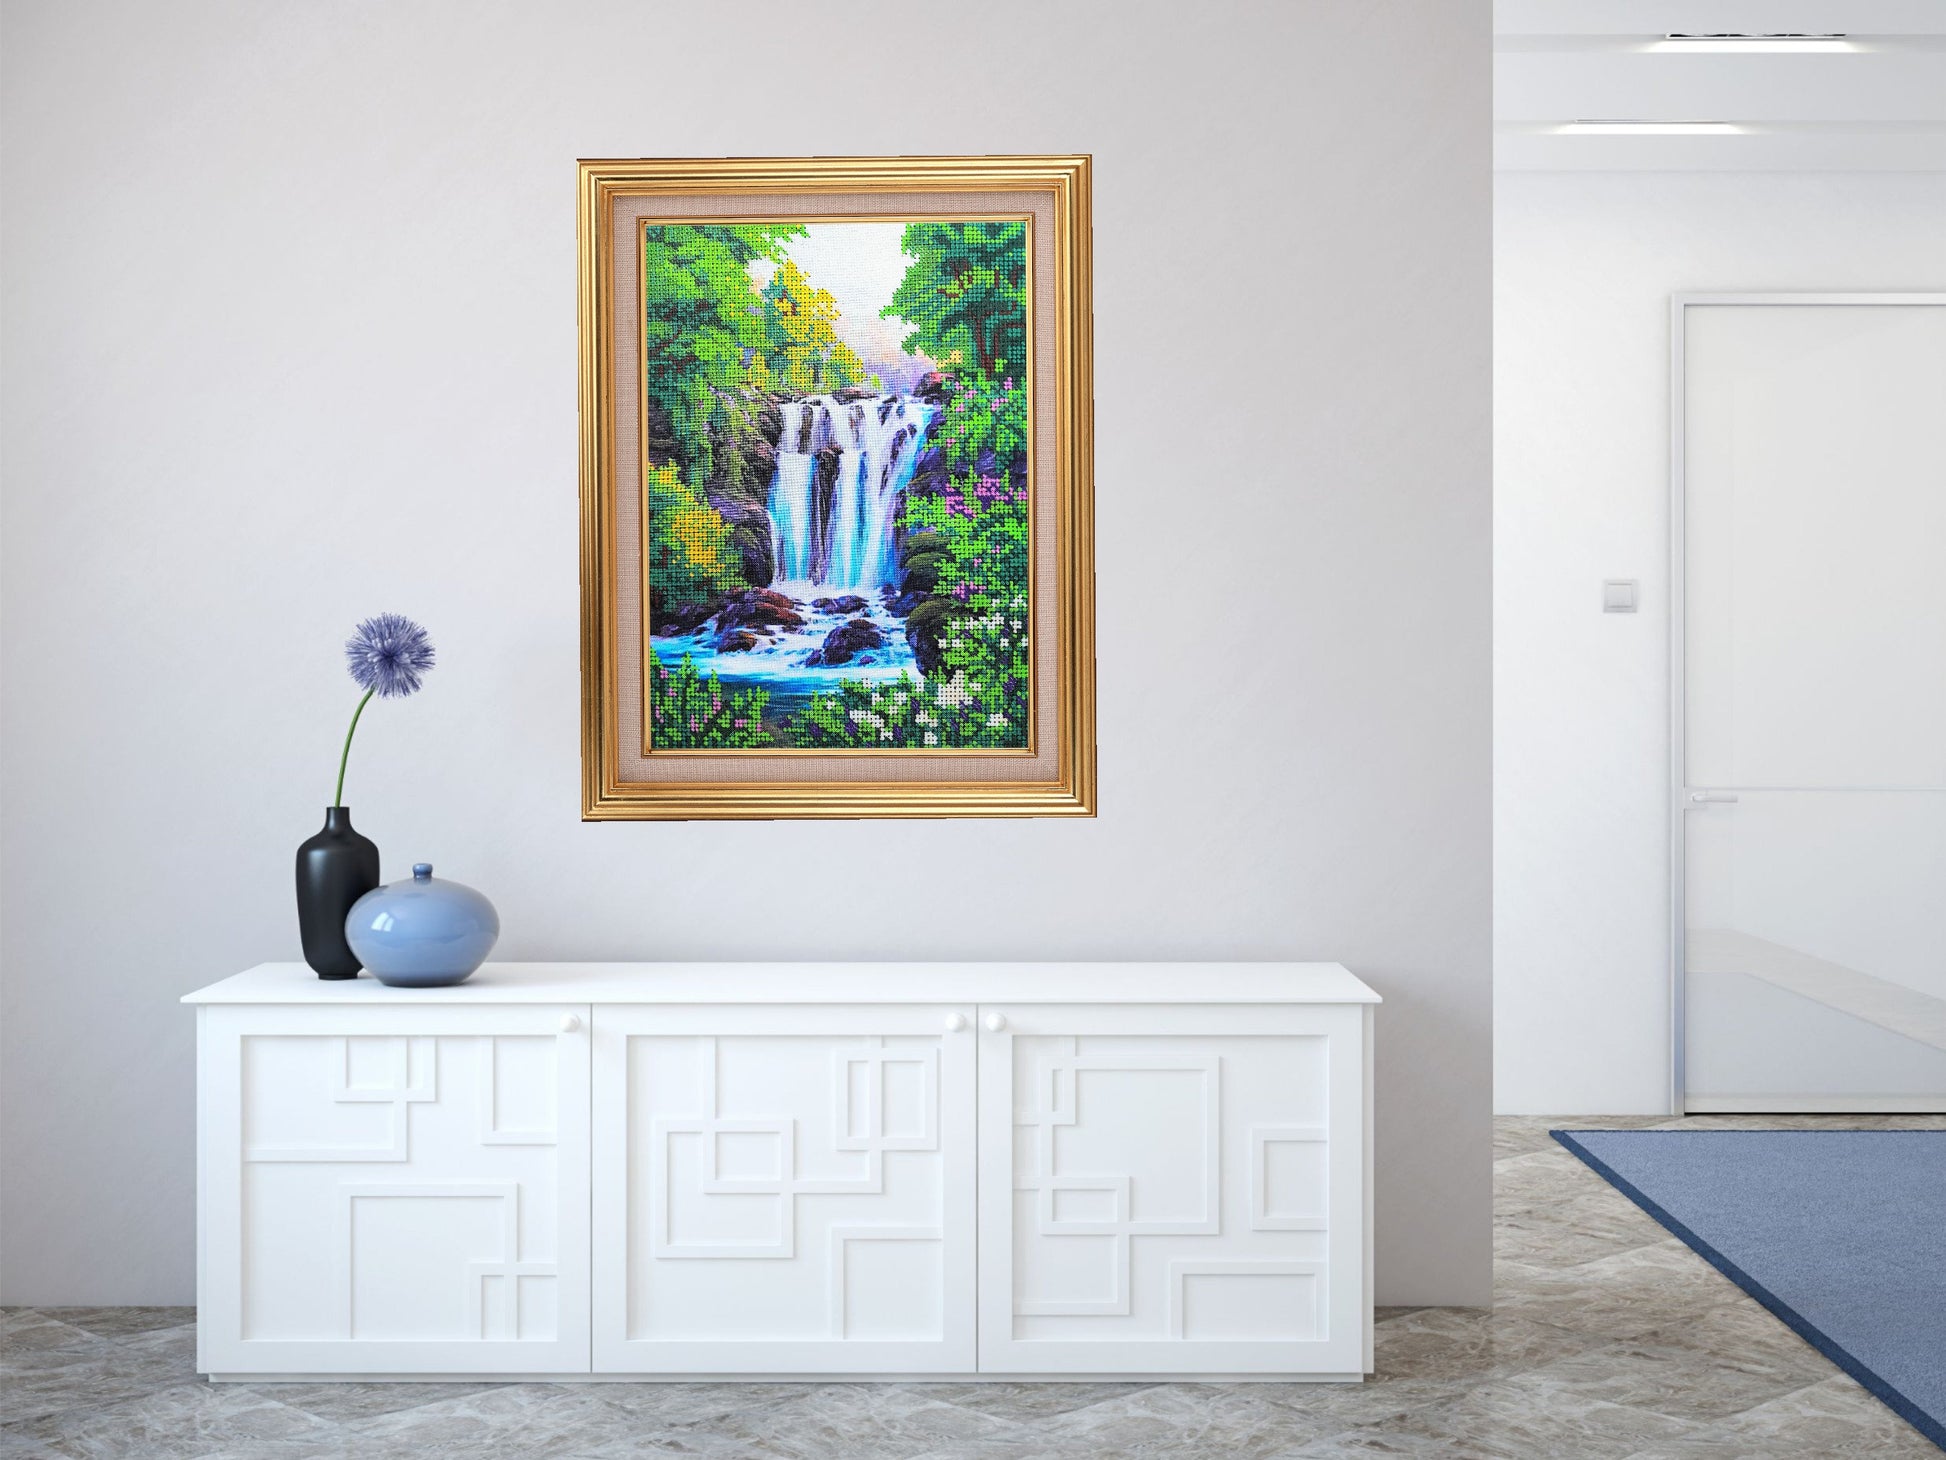 DIY Bead embroidery kit "Waterfall". Size: 7.5-10.2in (19-27cm) - VadymShop